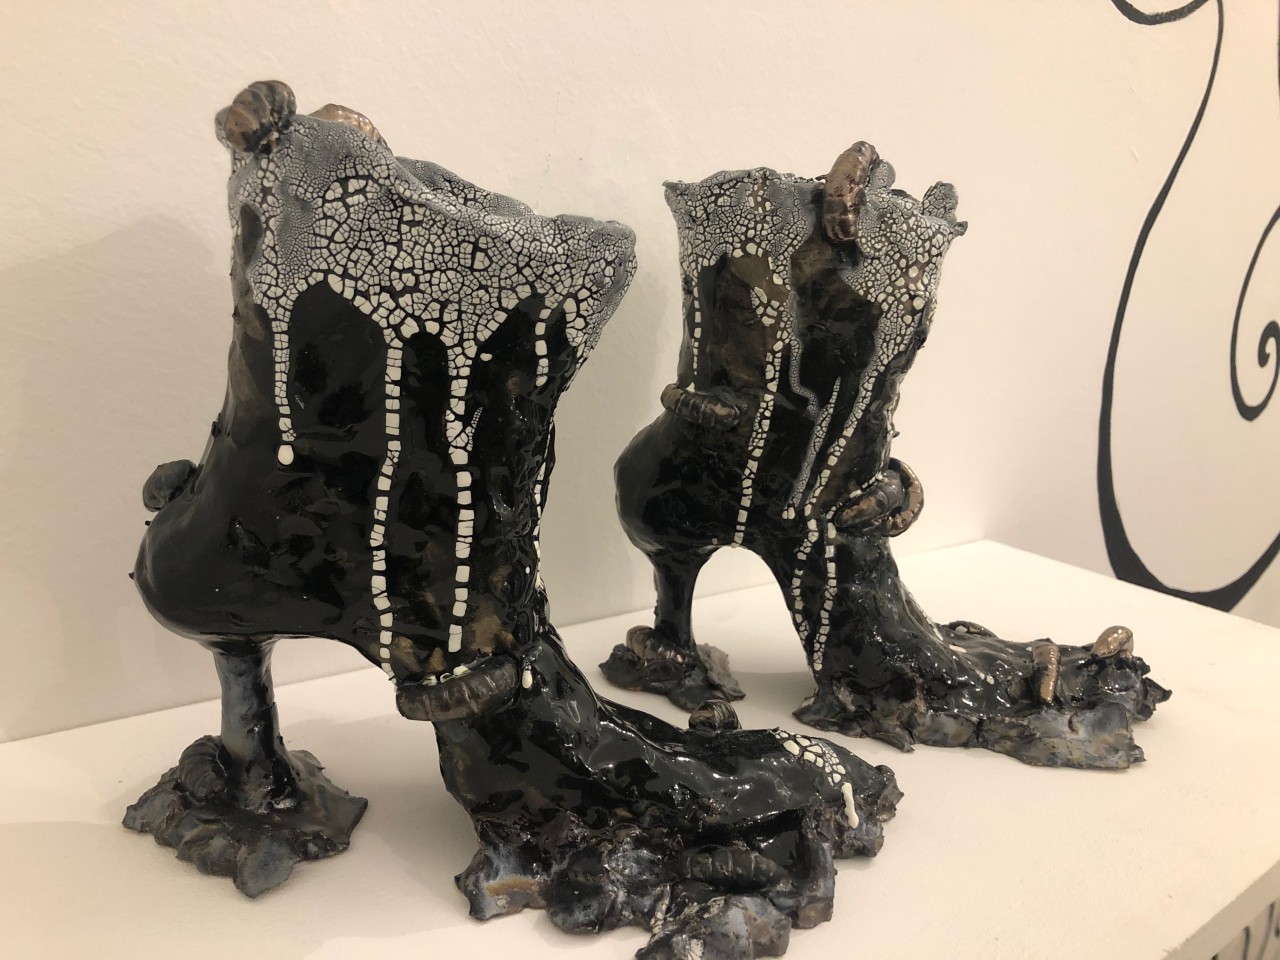 Paloma Proudfoot, The union of a human foot and a shoe is actually a monstrous custom, 2019